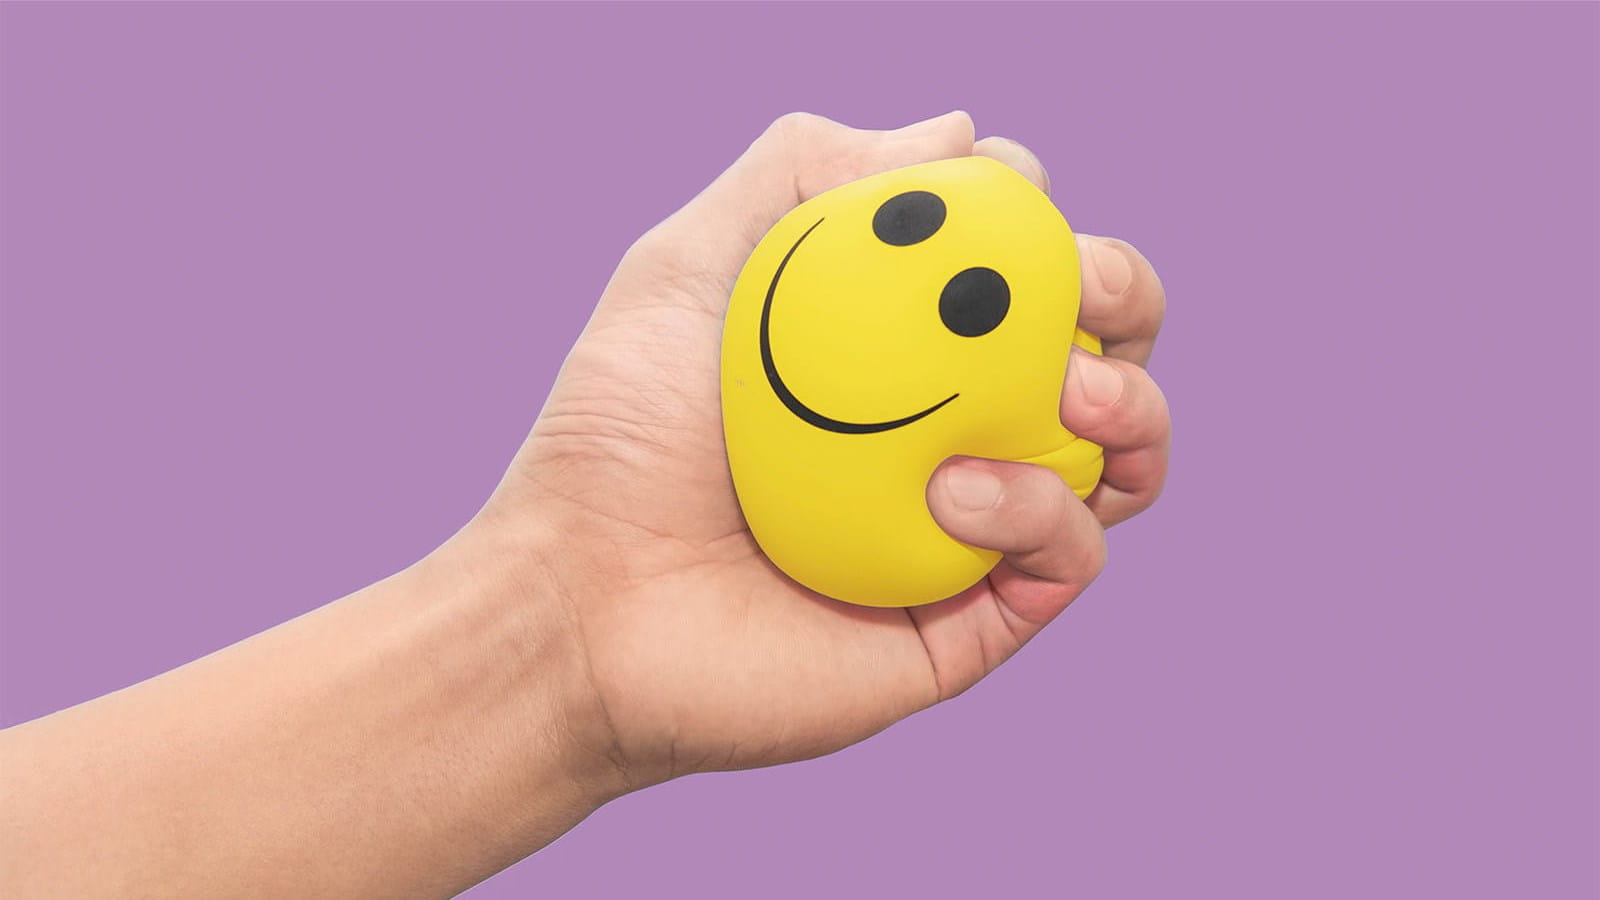 yellow stress ball smiley face held squeezes in a hand purple background